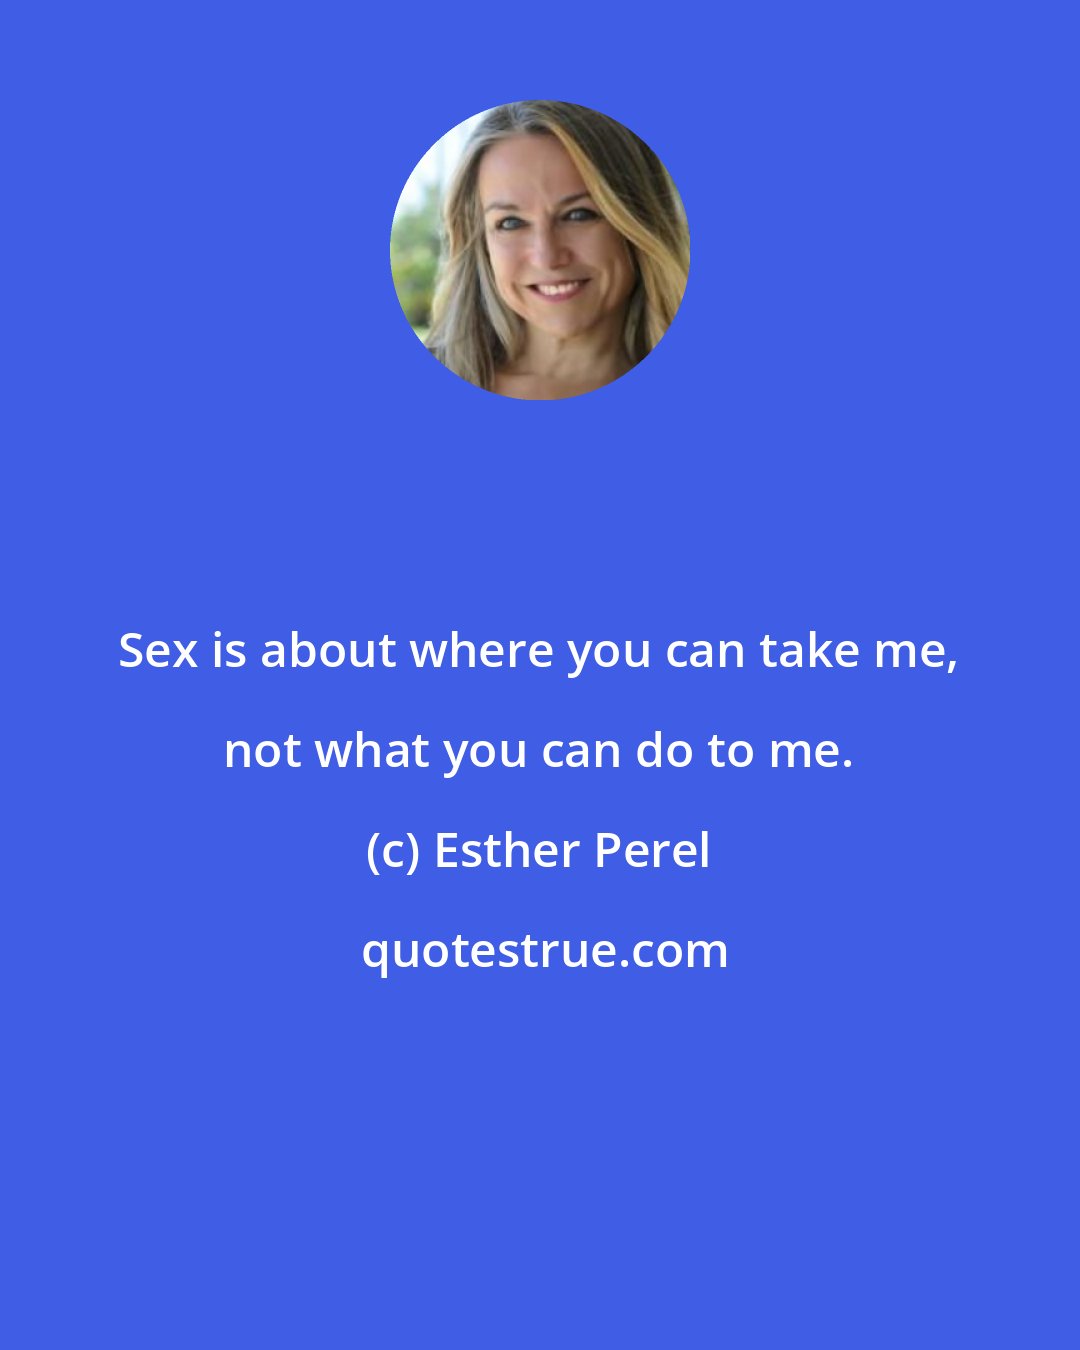 Esther Perel: Sex is about where you can take me, not what you can do to me.